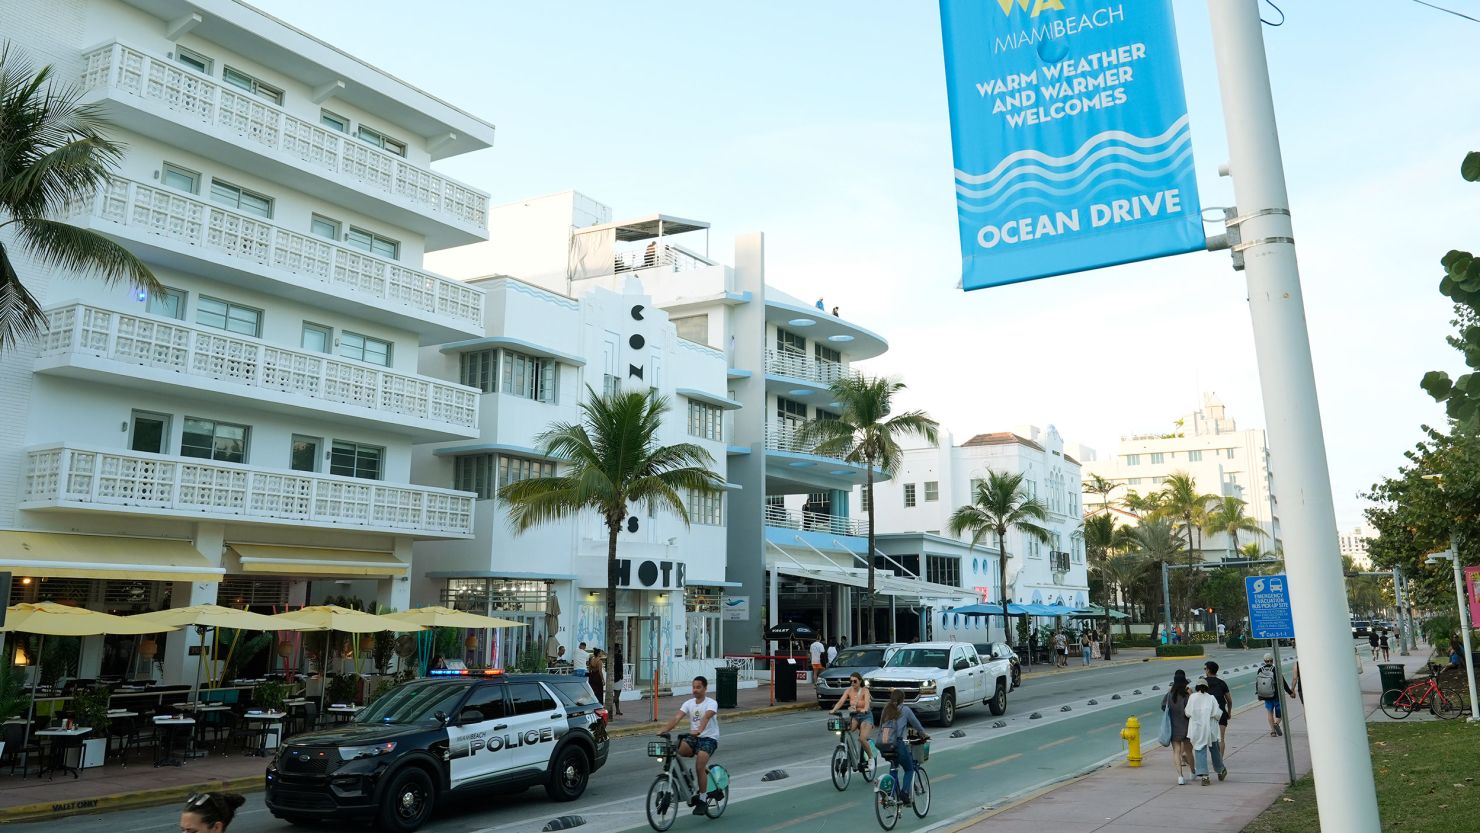 A police car cruises Ocean Drive February 27 in Miami Beach, Florida. State troopers are being deployed in the city during spring break.